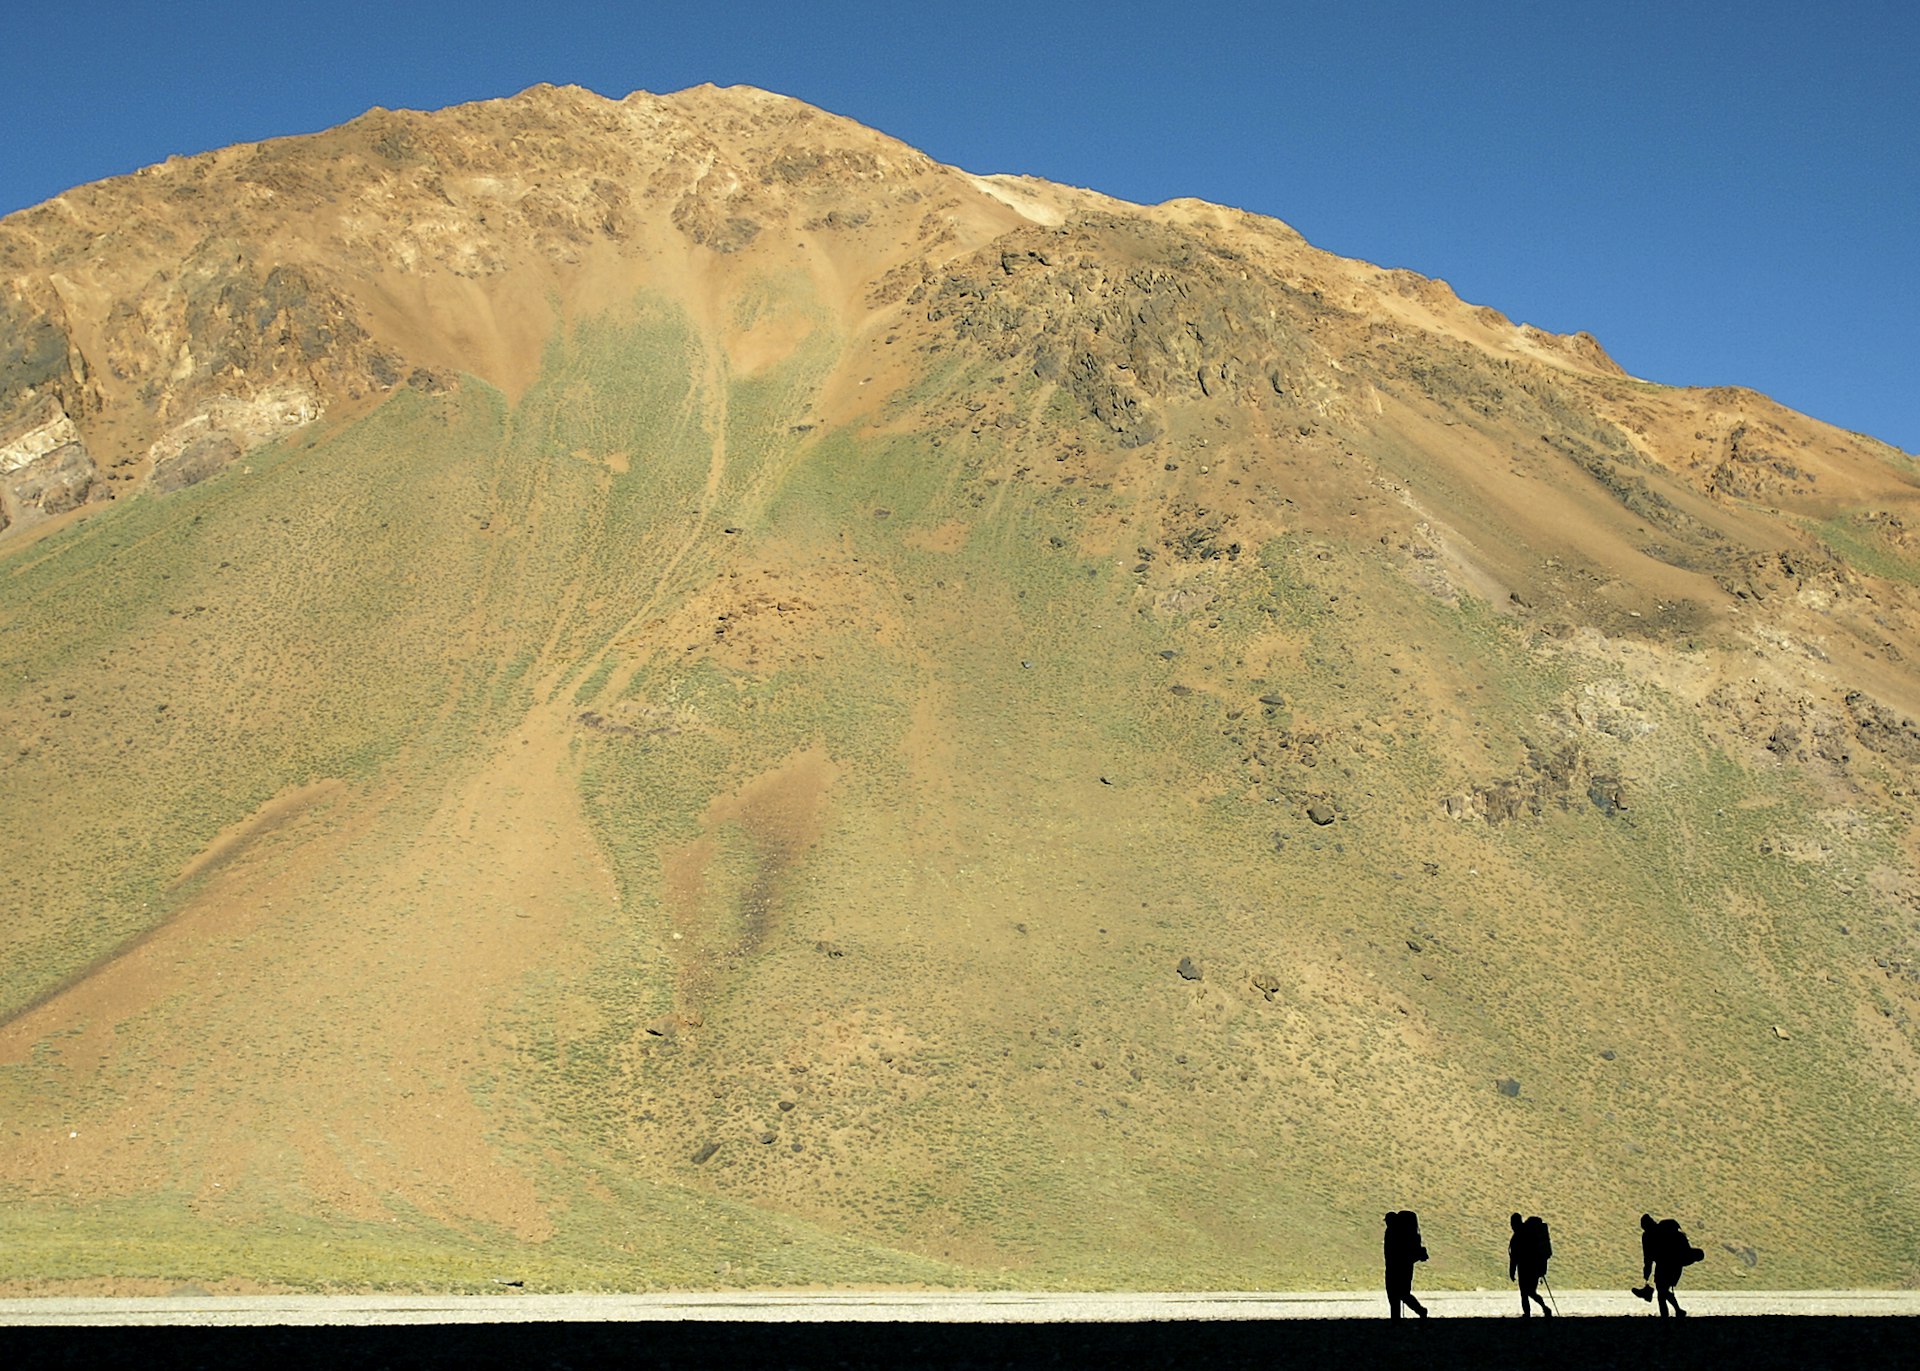 Walkers are silhouetted against the huge mountainside of Cerro Aconcagua, Argentina